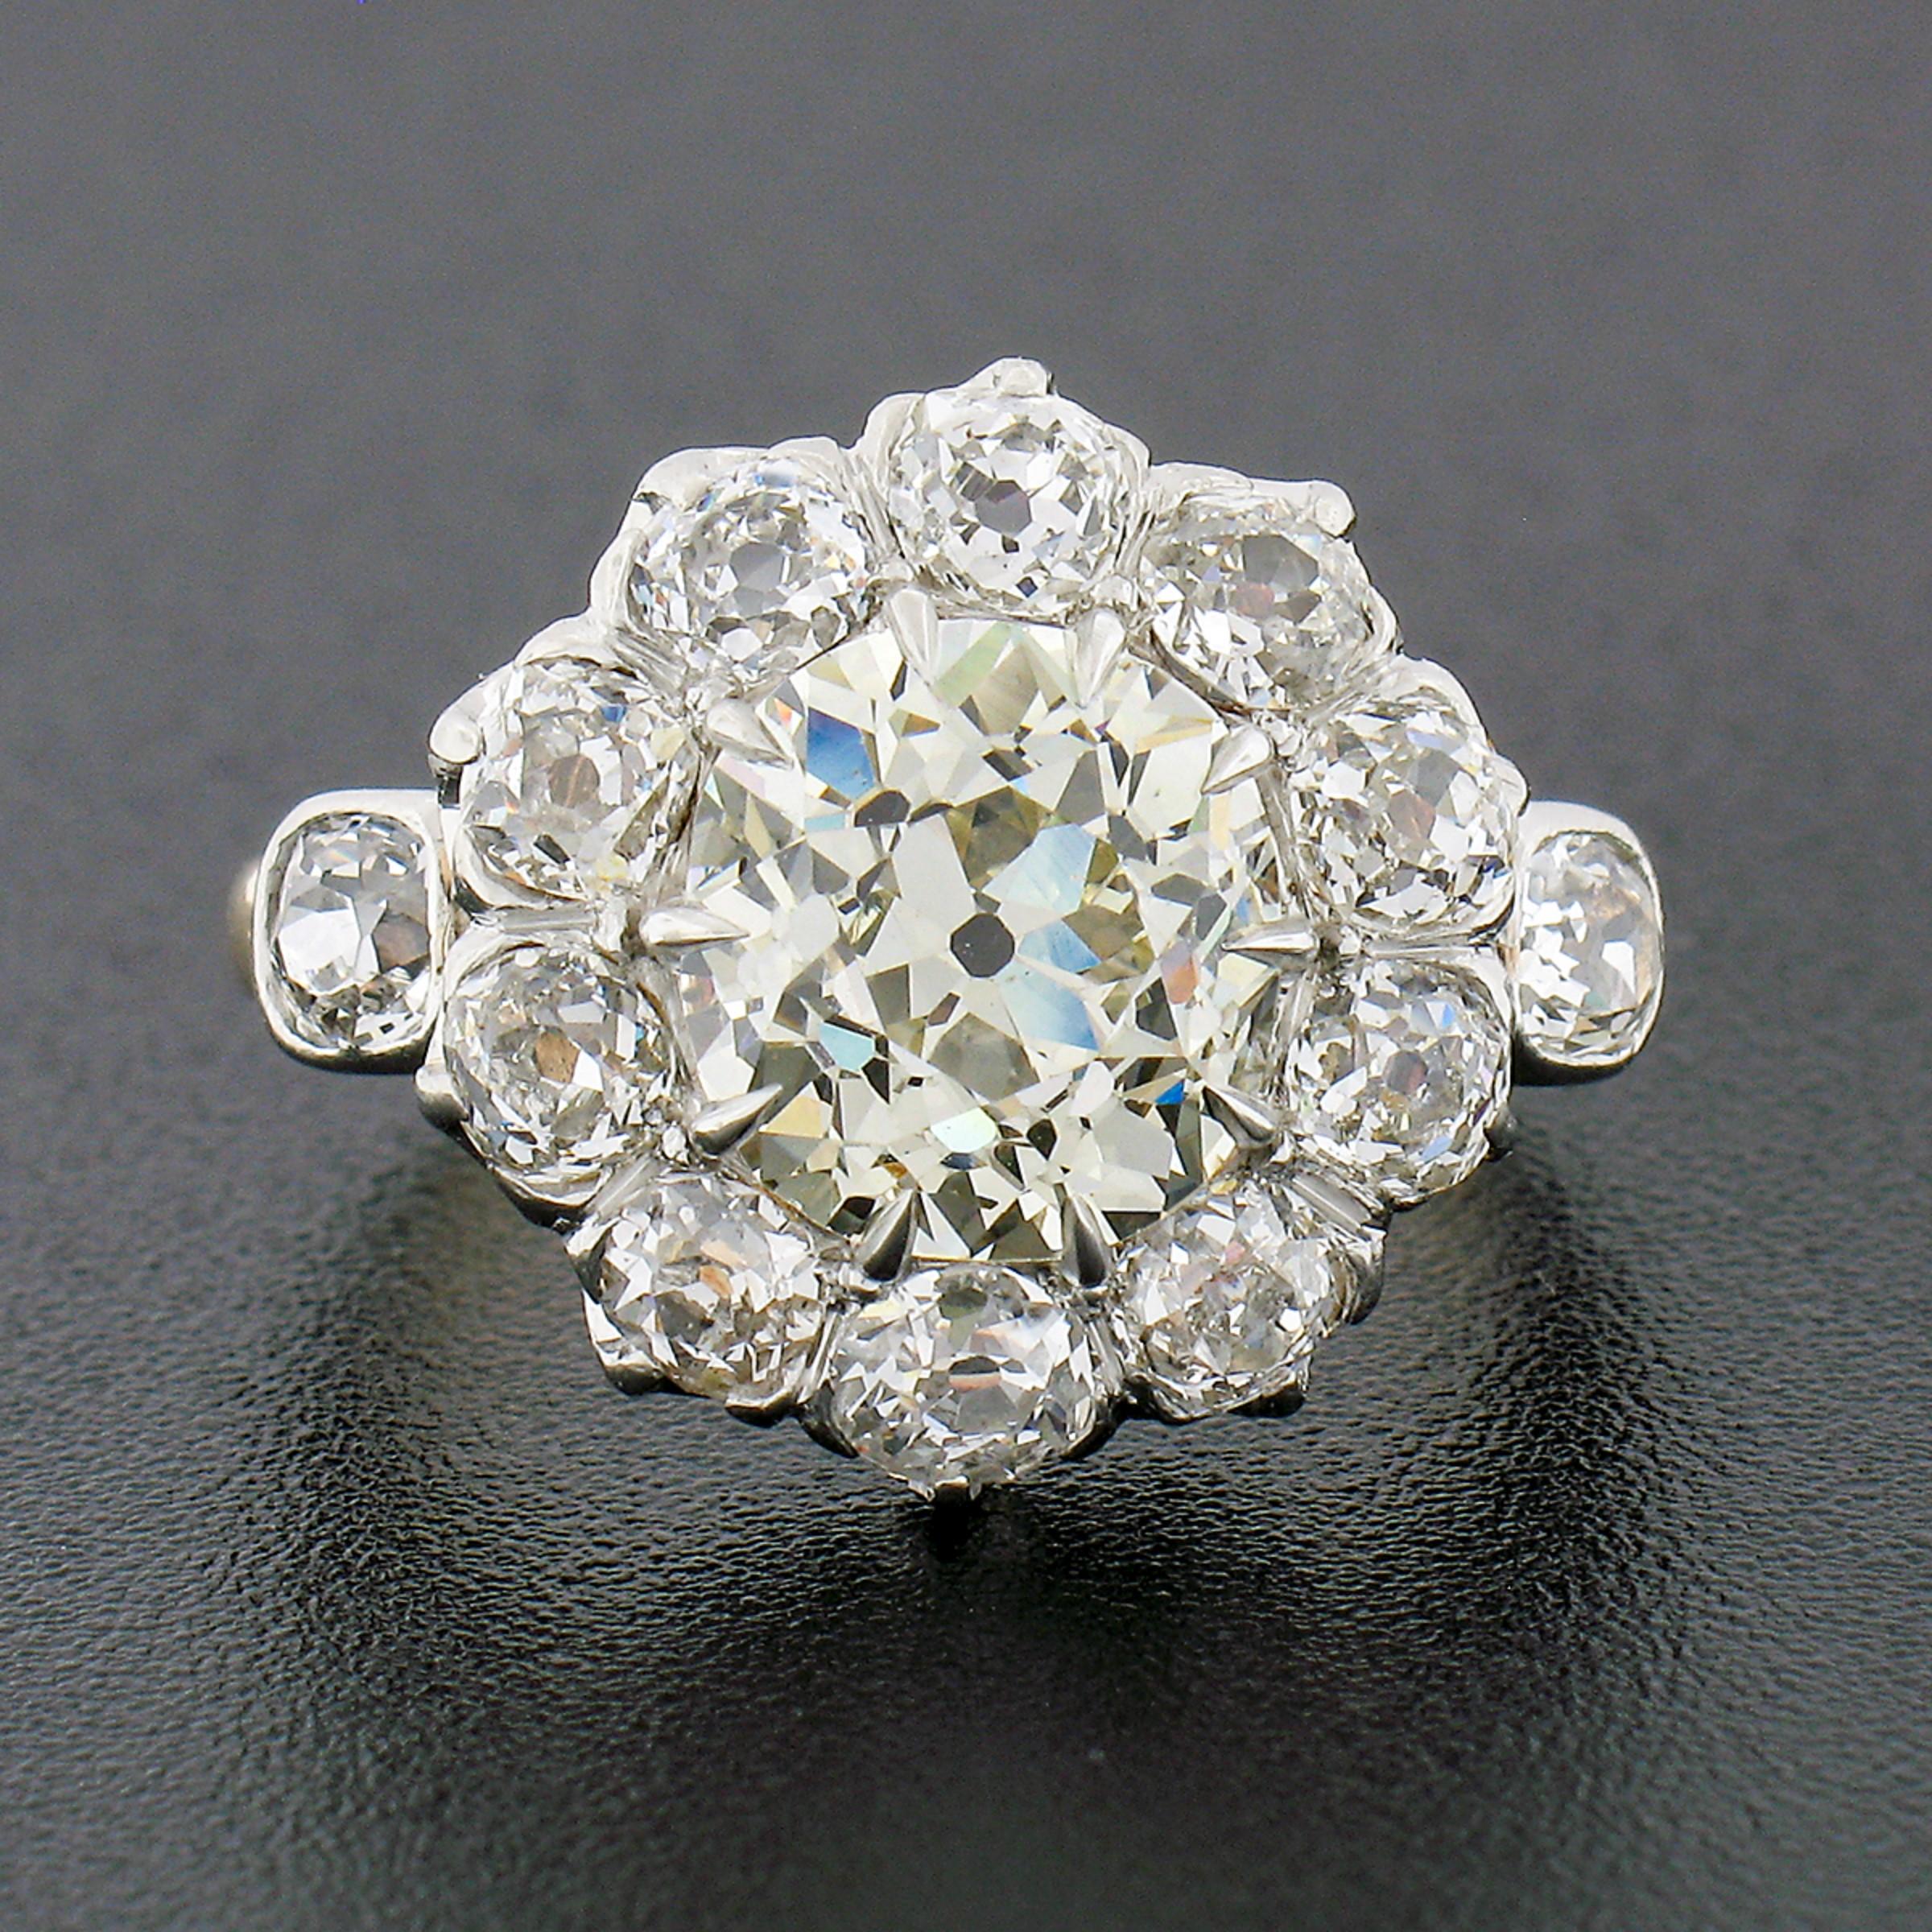 This stunning, handmade, antique flower cluster ring was crafted from solid 18k yellow gold with a platinum top during the Edwardian period. It features a breathtaking, old mine cut diamond neatly multi-prong set at the center, displaying a super